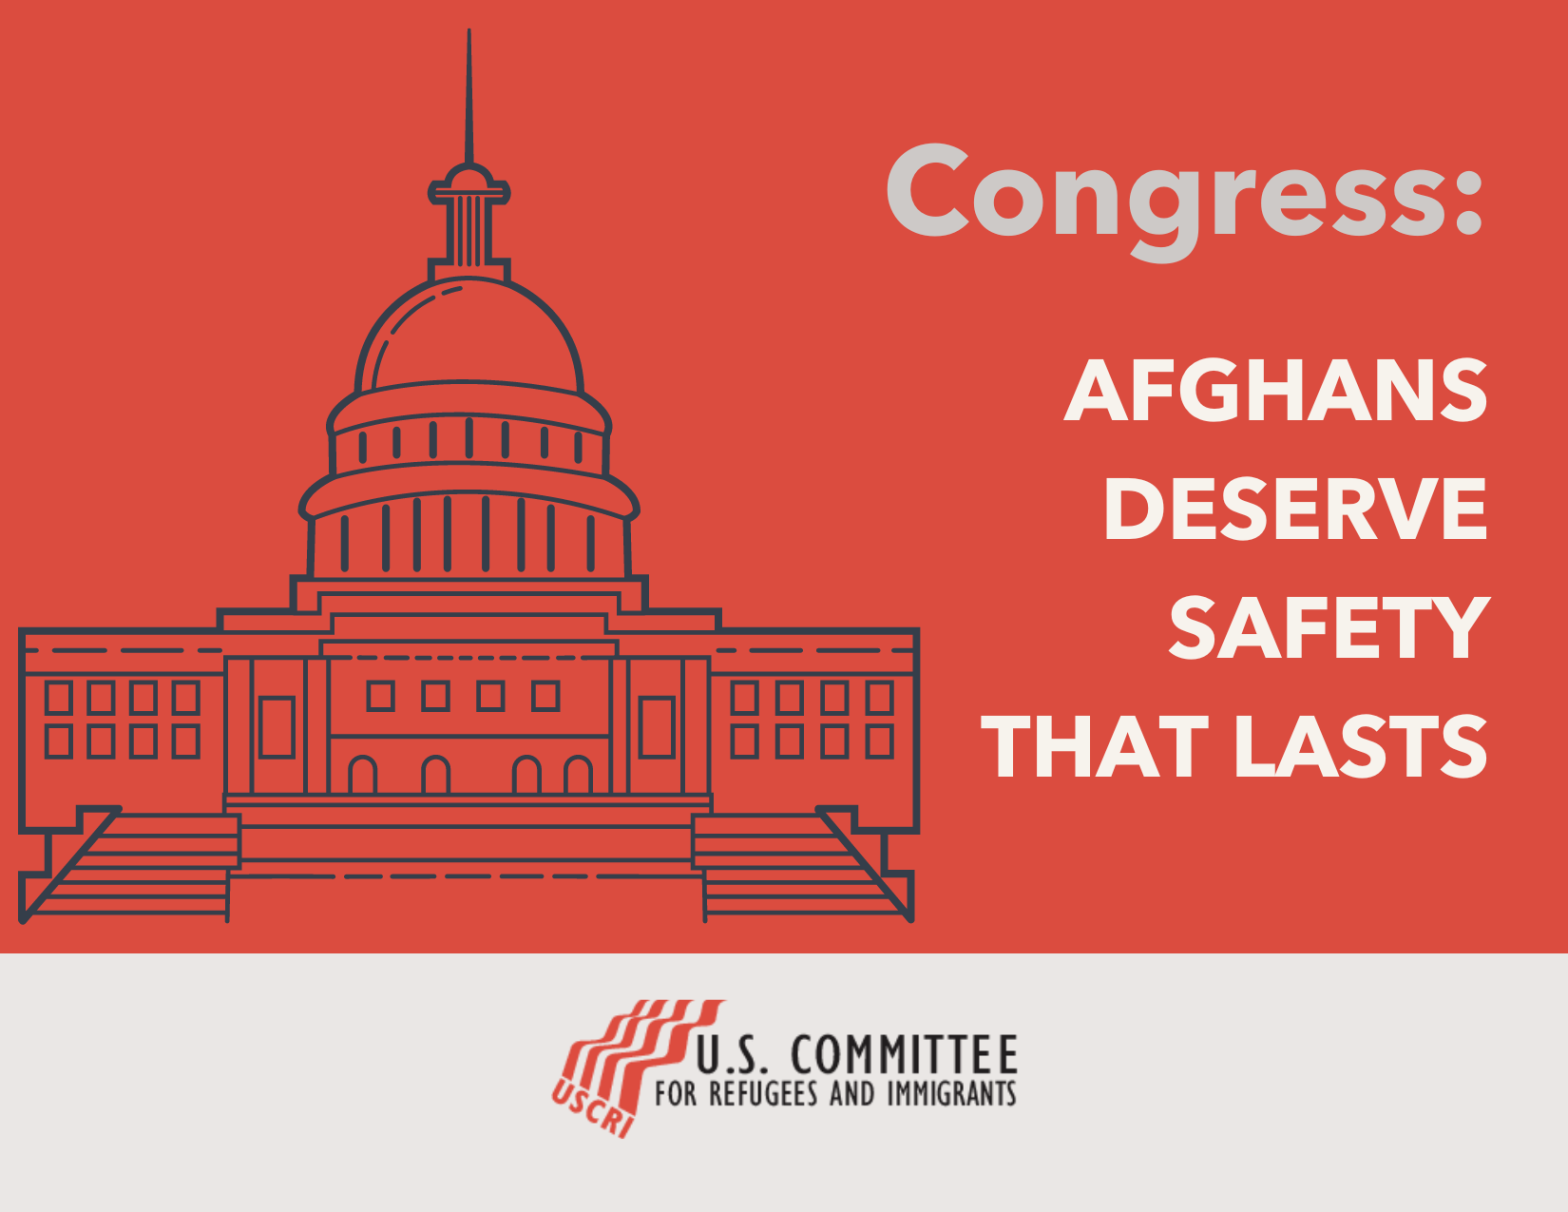 USCRI Responds to Congress’ Failure to Vote on Afghan Adjustment Act